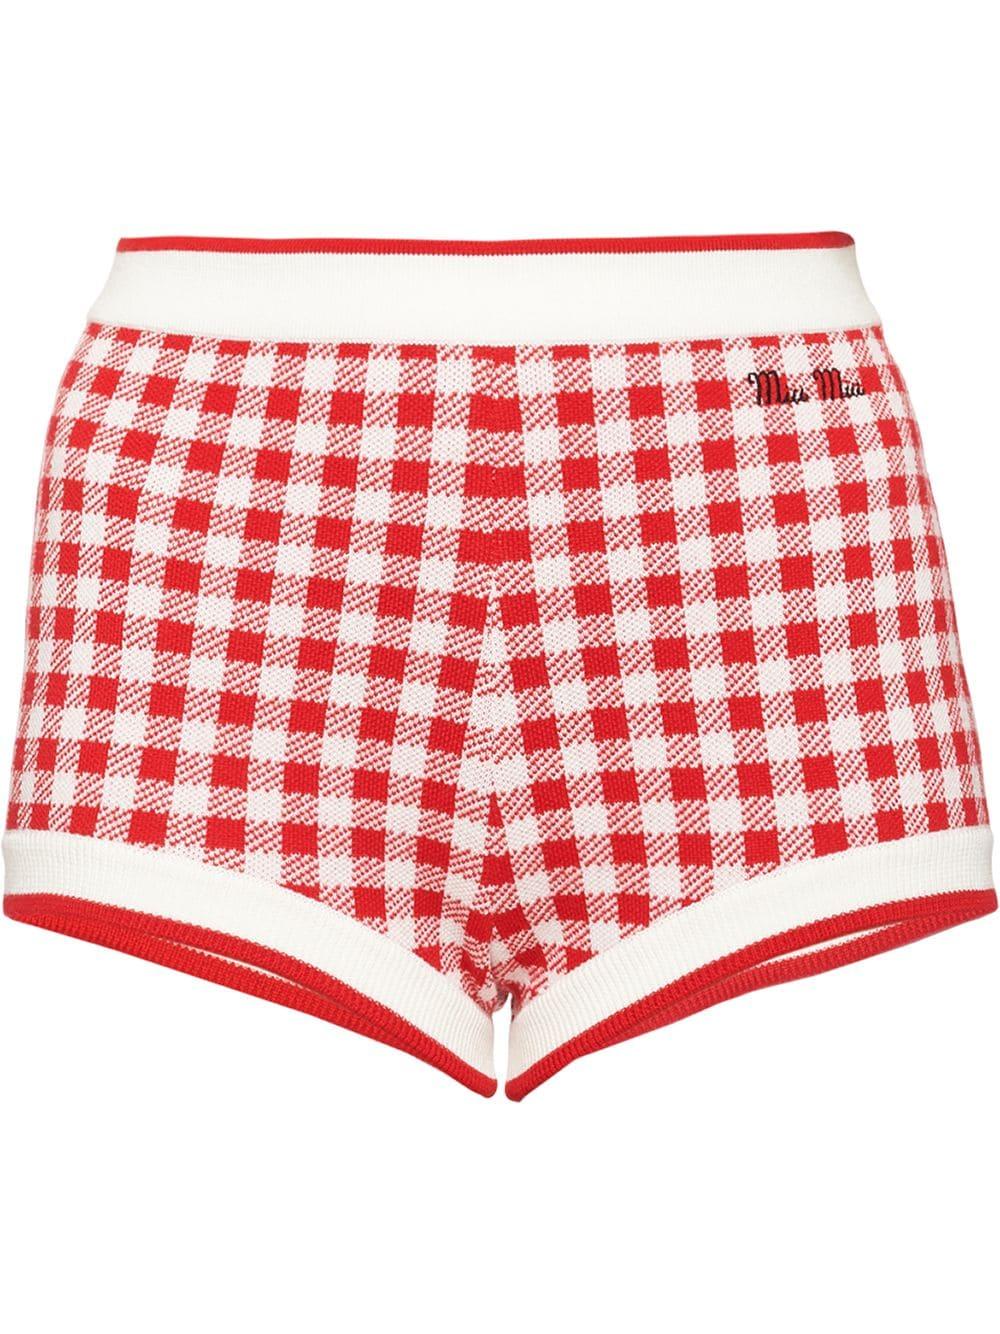 Miu Miu Wool Knitted Gingham Shorts in Red | Lyst